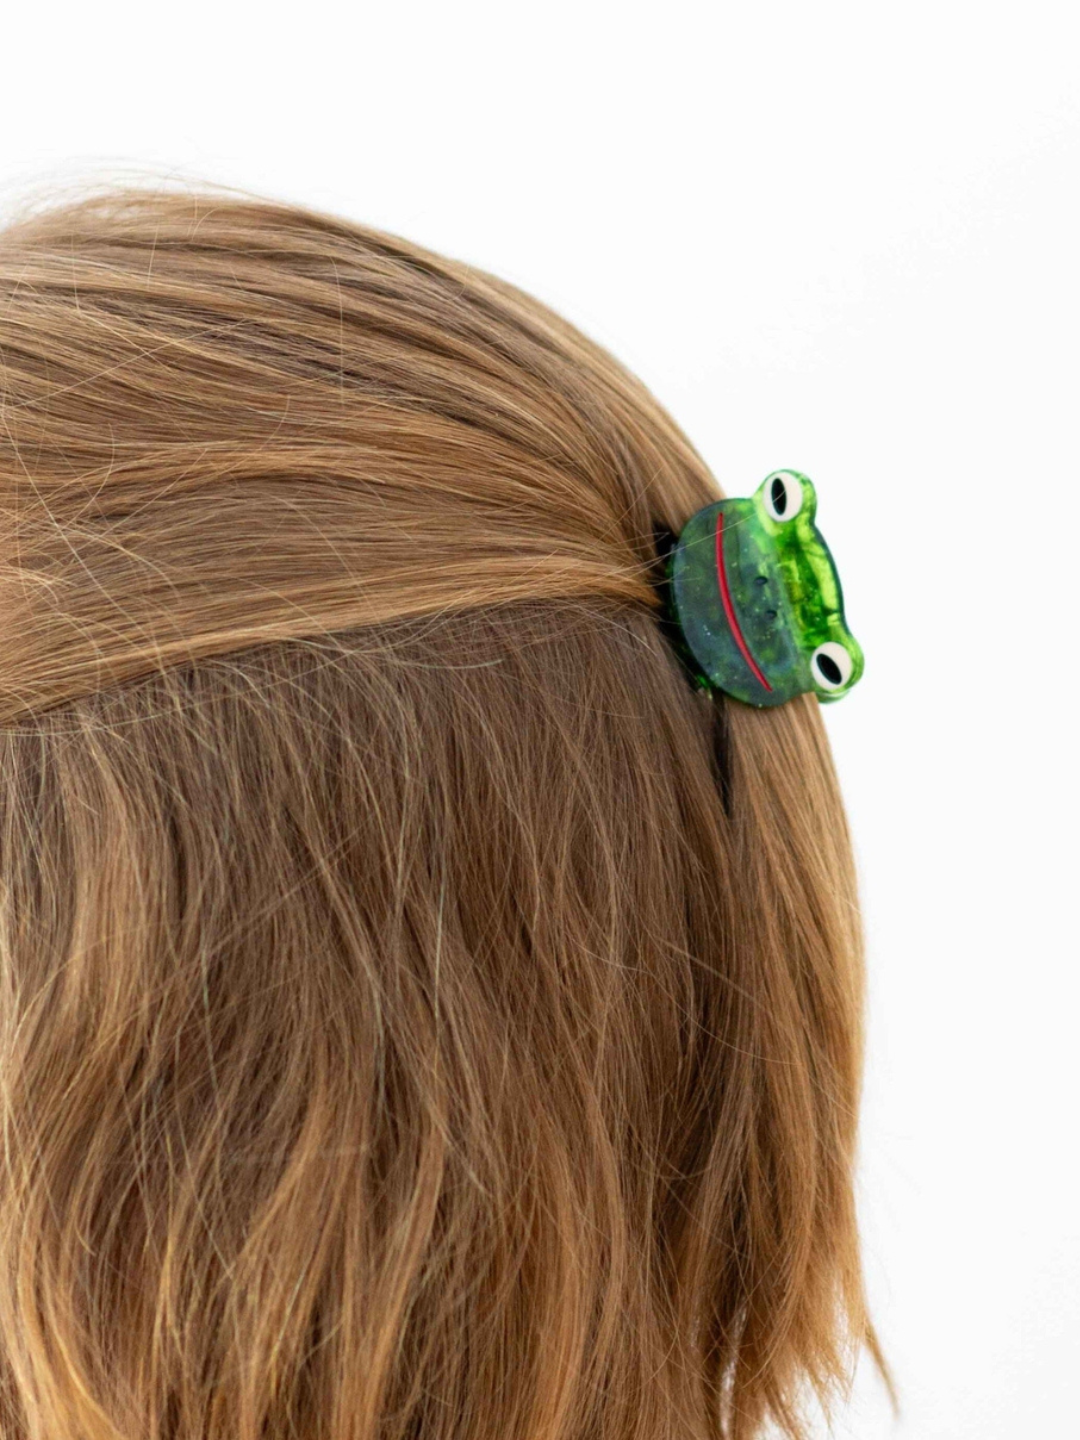 Green froggy hairclip on a half up half down hairstyle